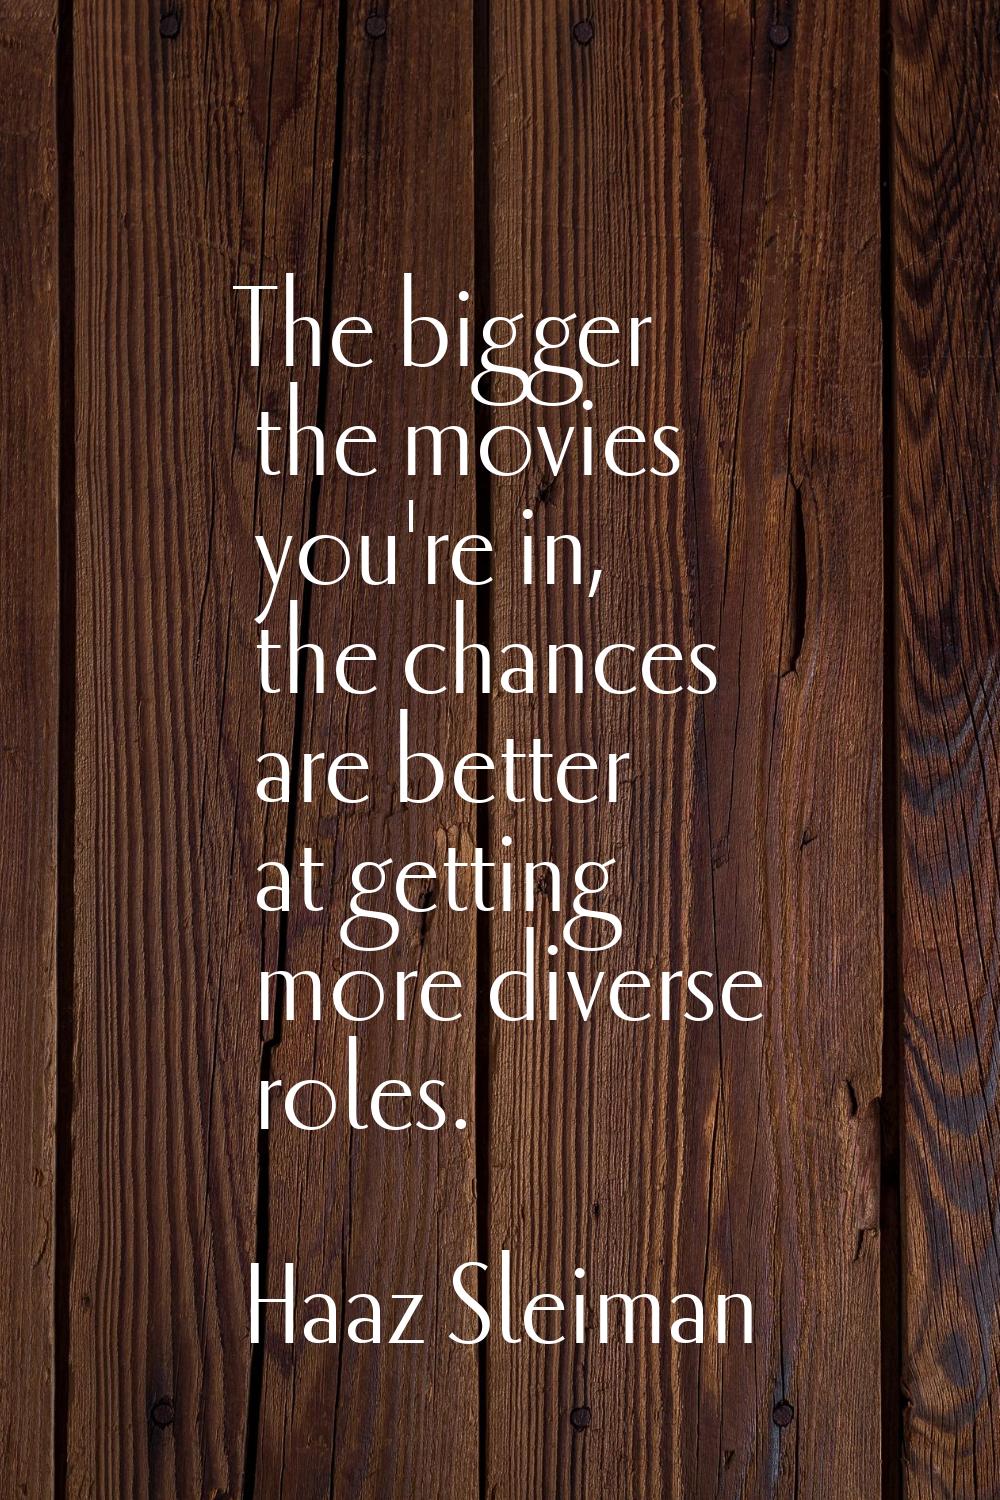 The bigger the movies you're in, the chances are better at getting more diverse roles.